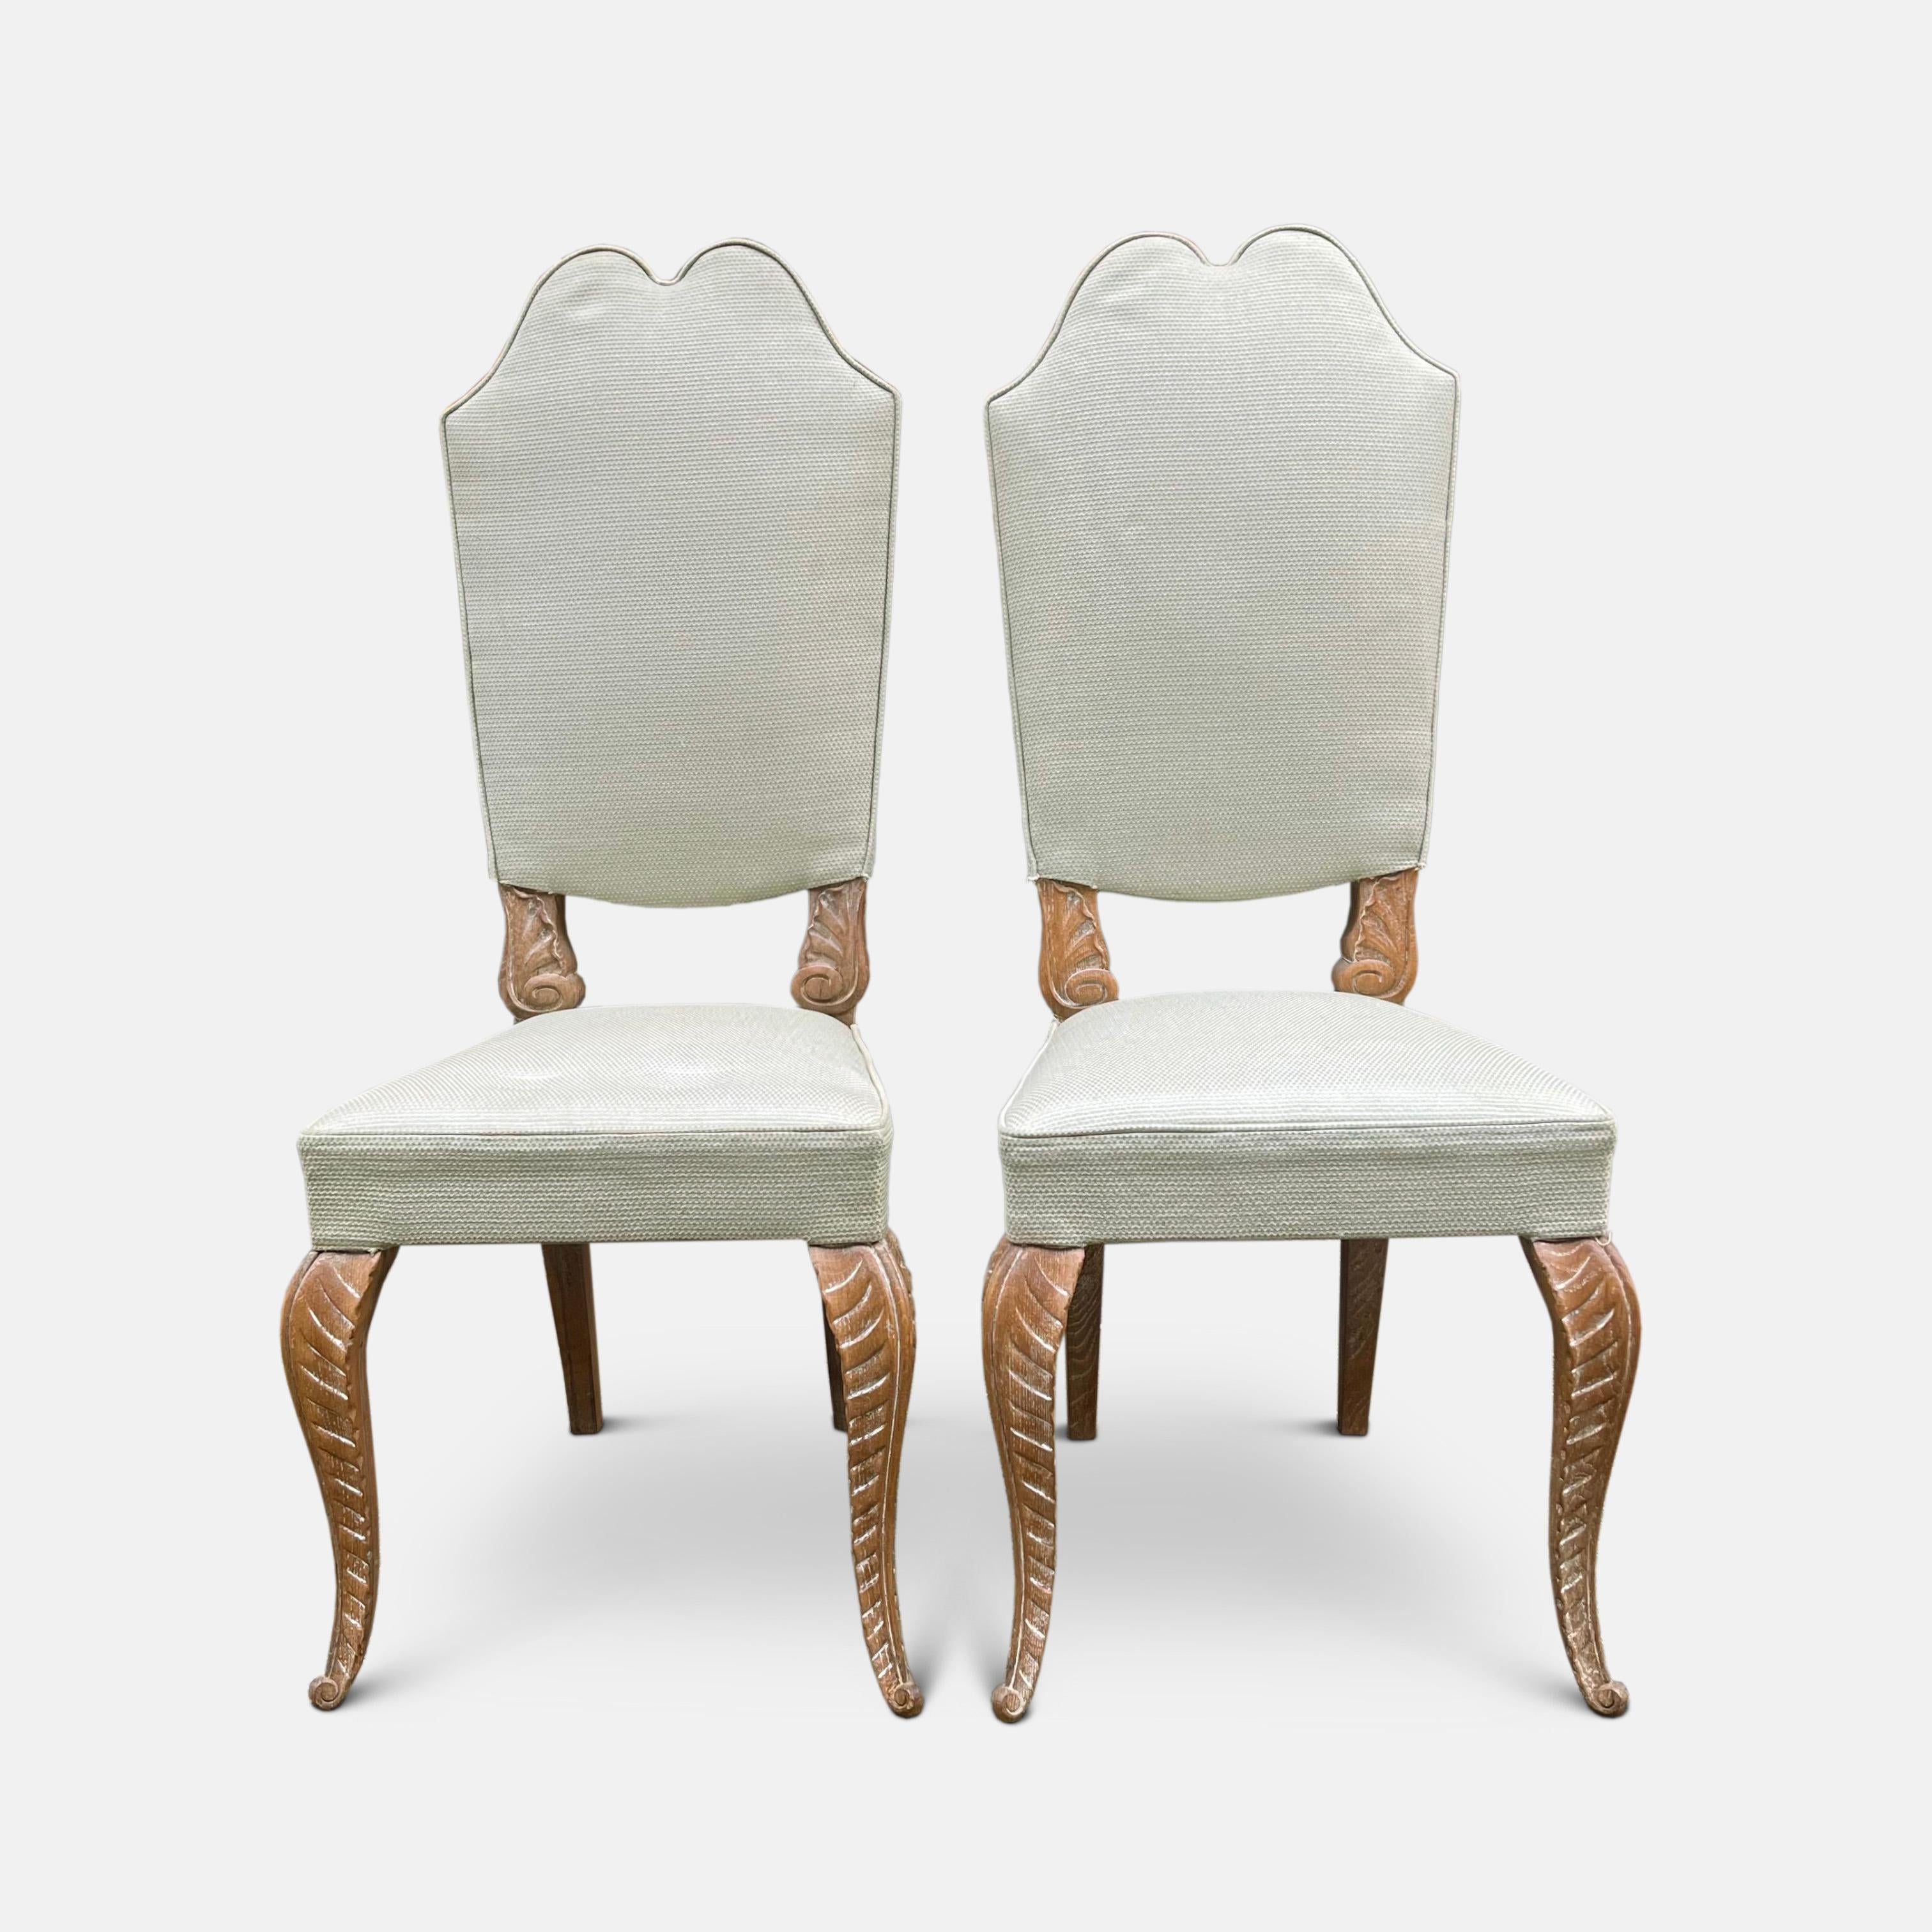 A set of eight 1940s limed oak dining chairs by Maison Jansen with high straight backs, shaped wonderfully at the top with the flourish of a double curved arch. The lower frame of each back is carved with acanthus leaves, along with the long,